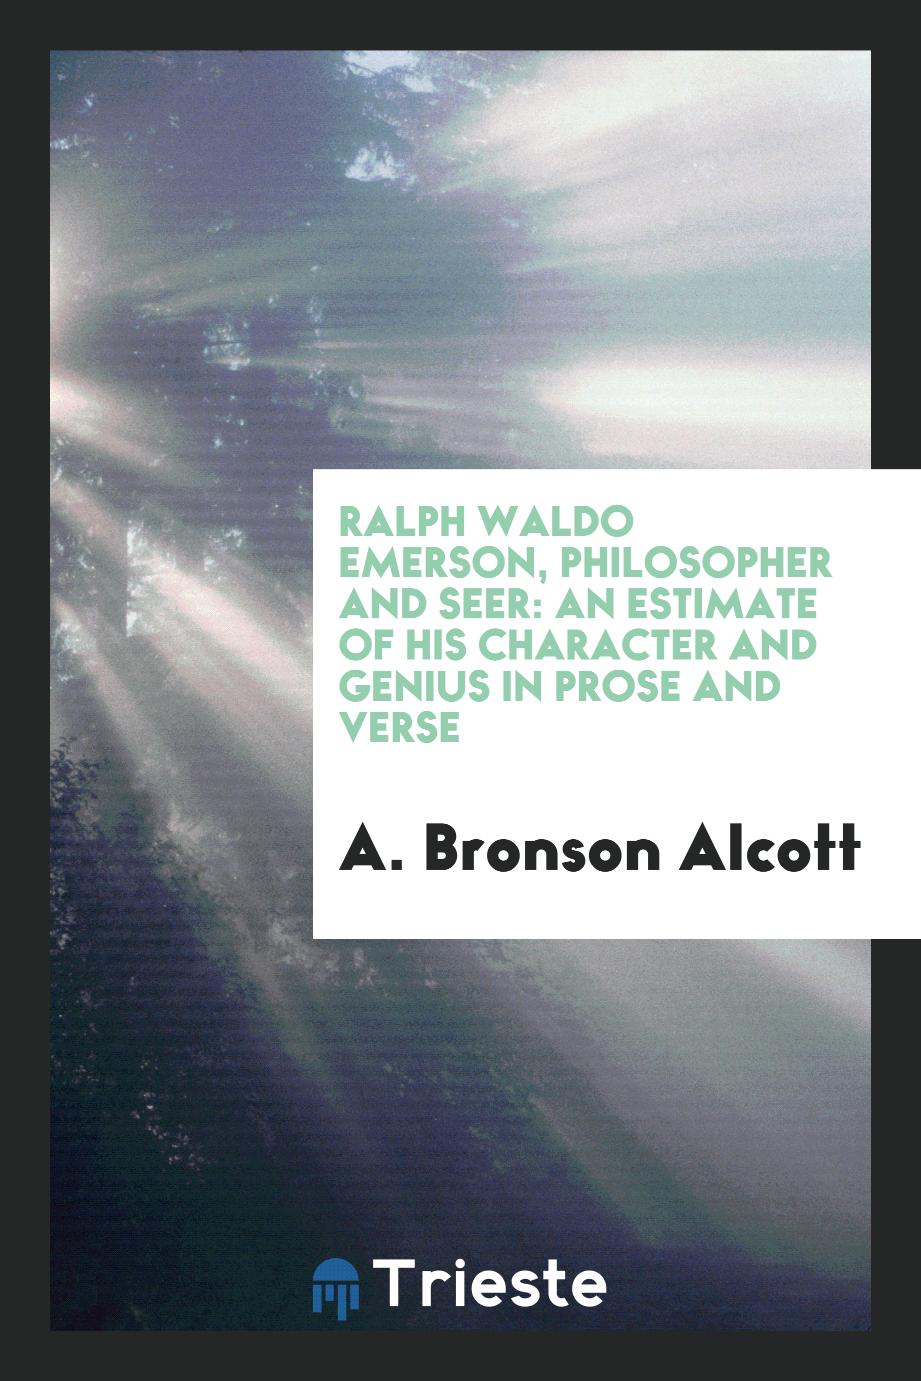 Ralph Waldo Emerson, Philosopher and Seer: An Estimate of His Character and Genius in Prose and Verse